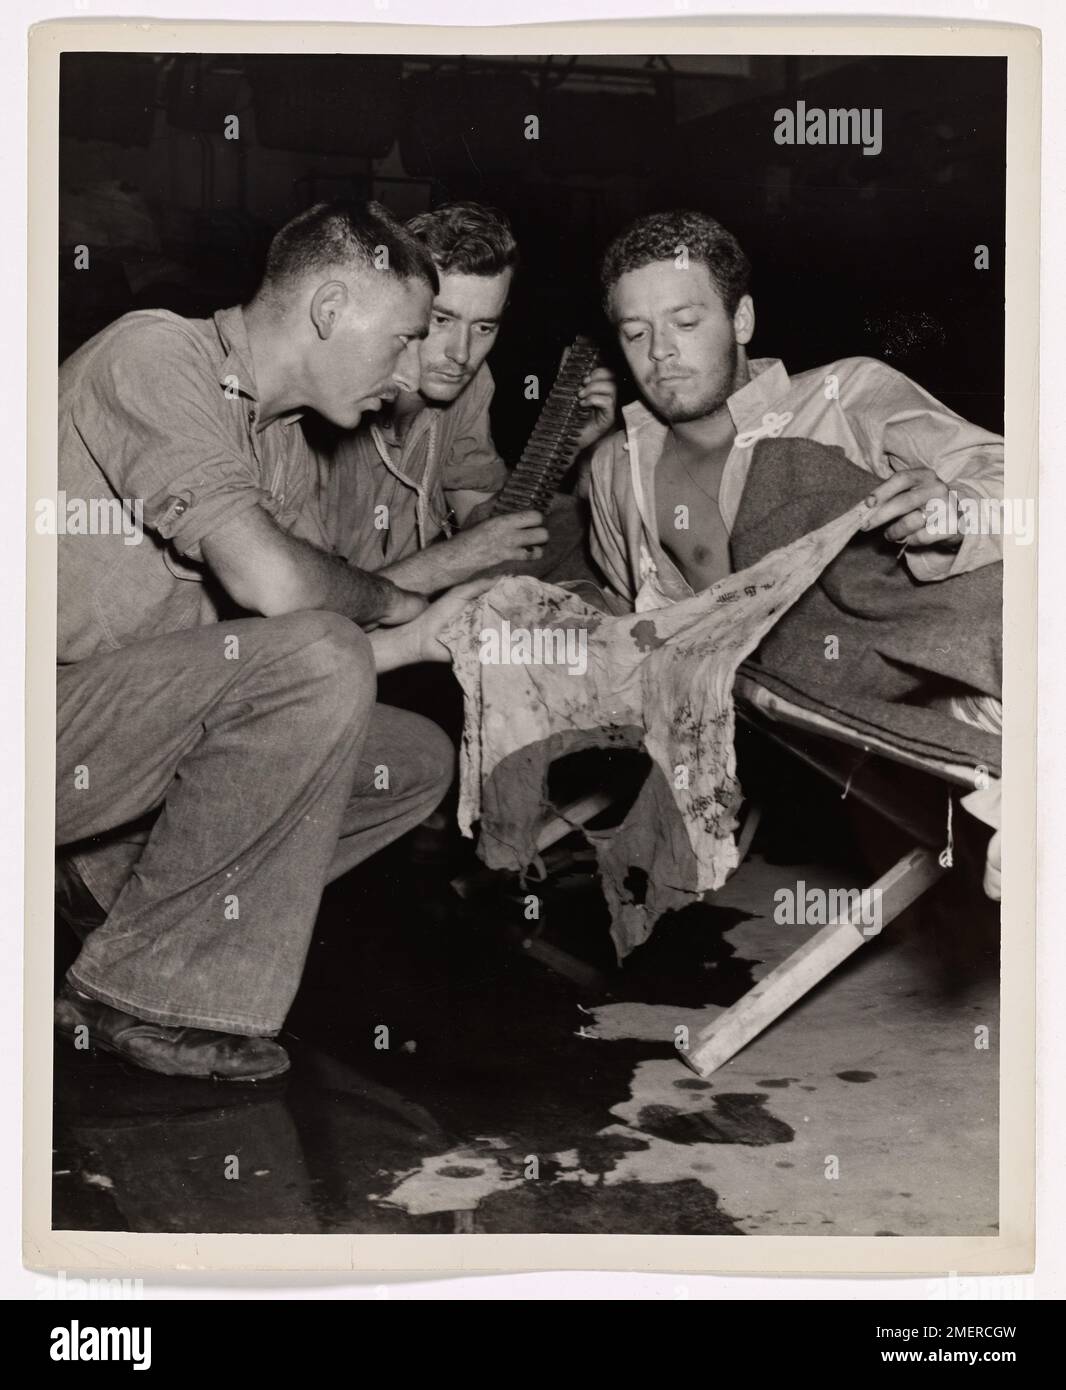 The Coast Guard Brings Out the Wounded. Pharmacist's Mate on the job -- Aboard a Coast Guard-manned LST somewhere in the Pacific invasion zone, Marine Corp. John T. Curry (right) of Decatur, Illinois, wounded in a beach assault, exhibits a bullet-riddled Jap battle flag to two Coast Guardsmen on duty in the floating hospital. They are David Green (foreground), pharmacist's mate second class, of Staten Island, N.Y. and Shelby K. Lay, boatswain's mate second class, of Harrison, Arkansas. Stock Photo